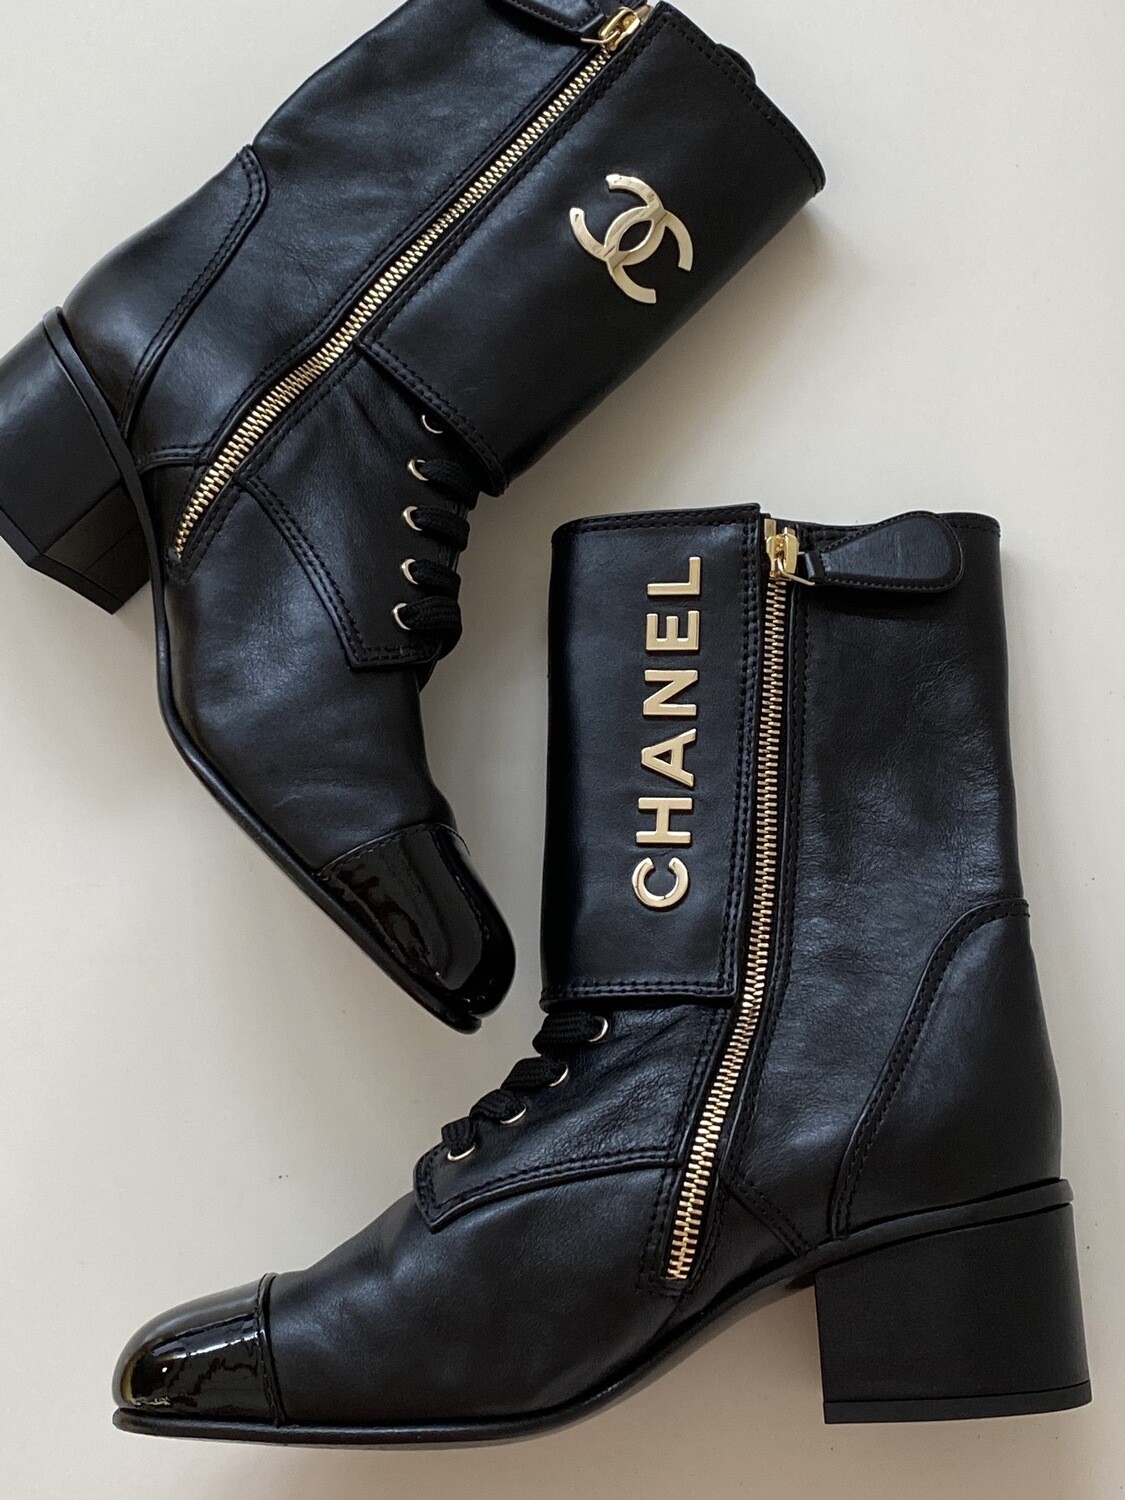 CHANEL CC LETTER BLACK LEATHER LACE UP COMBAT MOTORCYCLE BOOTS 39 / 9